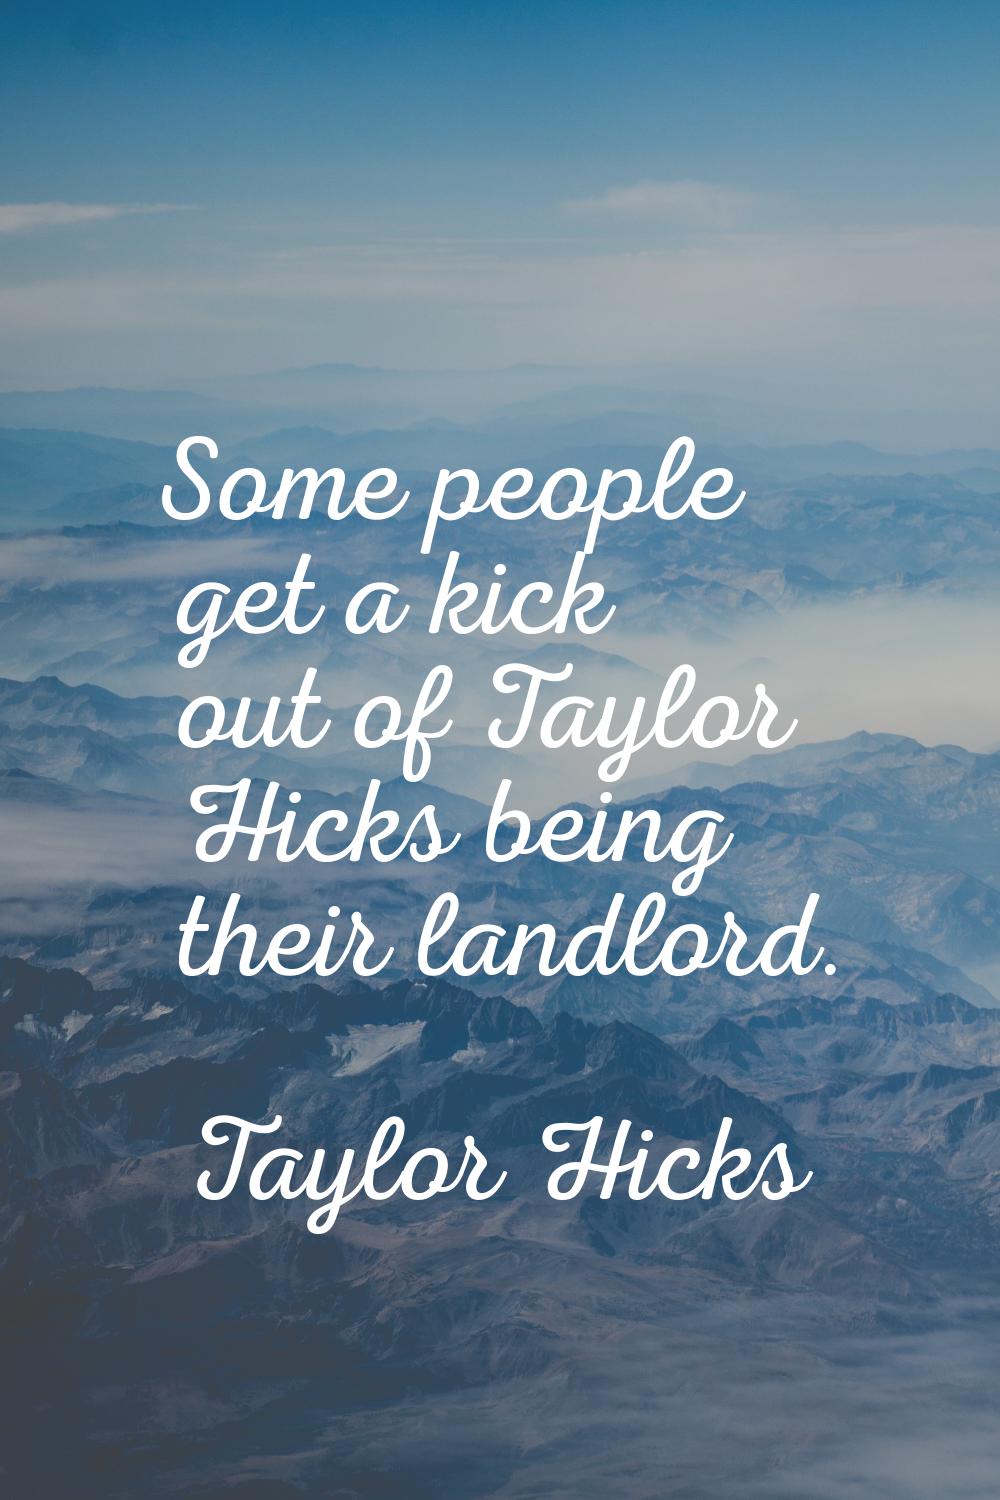 Some people get a kick out of Taylor Hicks being their landlord.